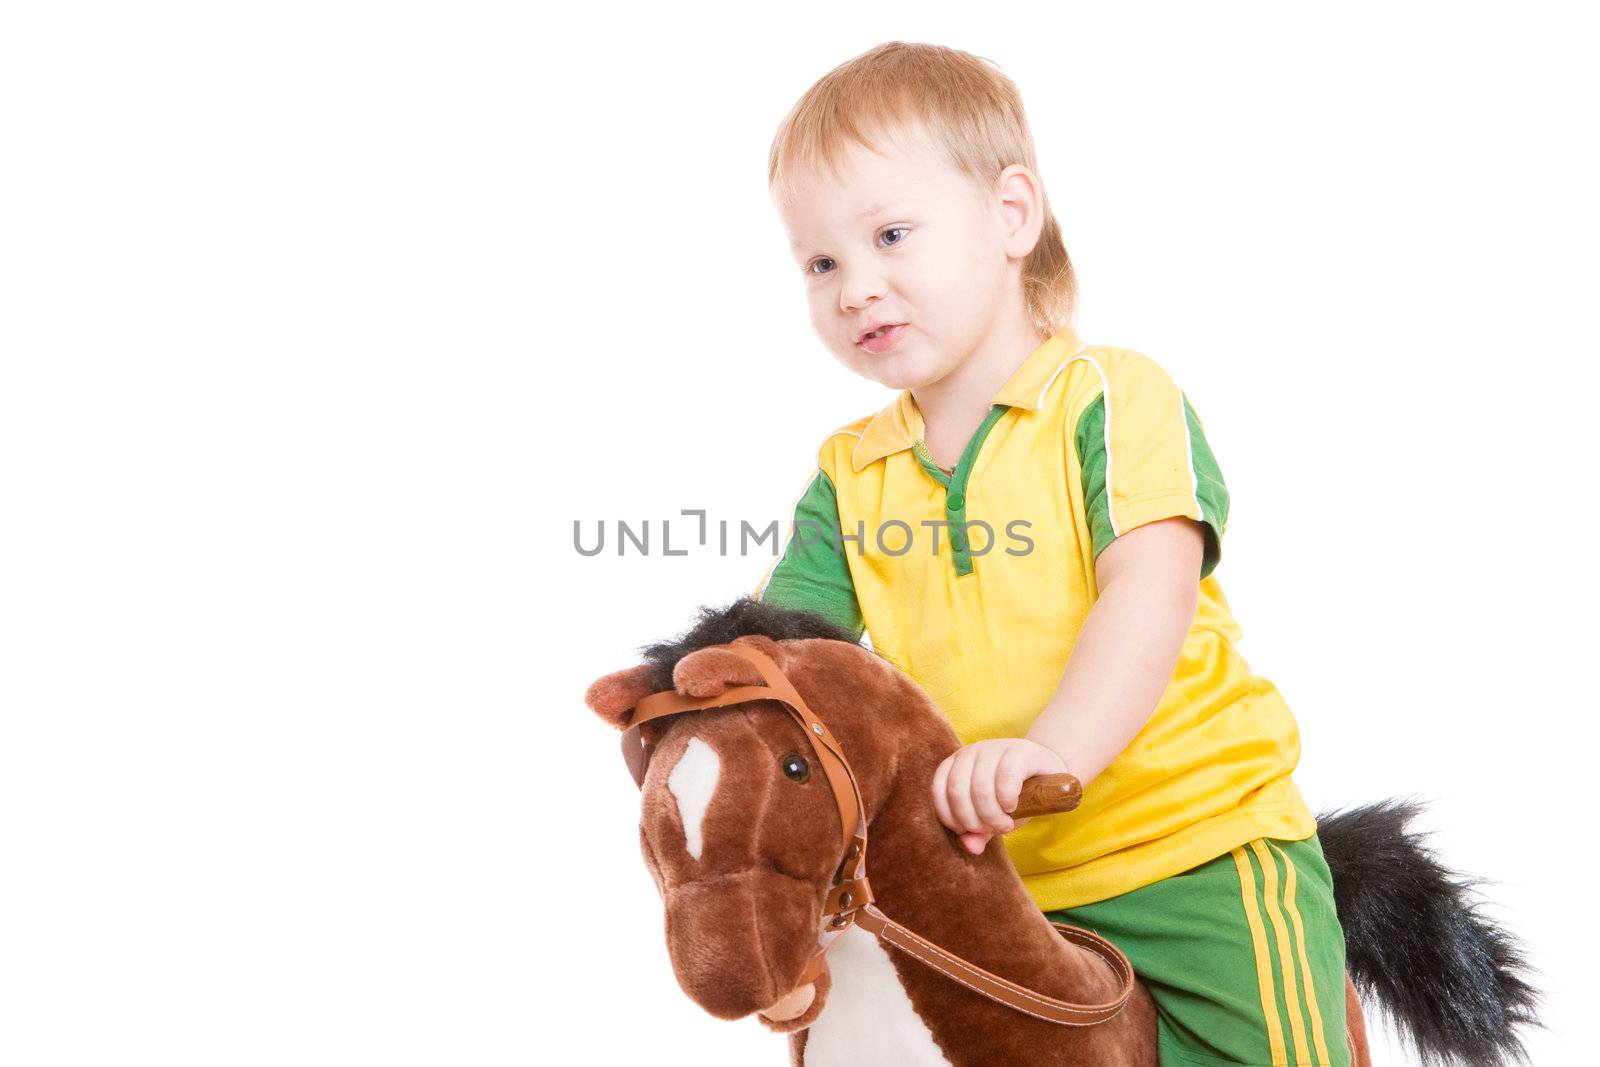 a small boy on a toy horse by vsurkov